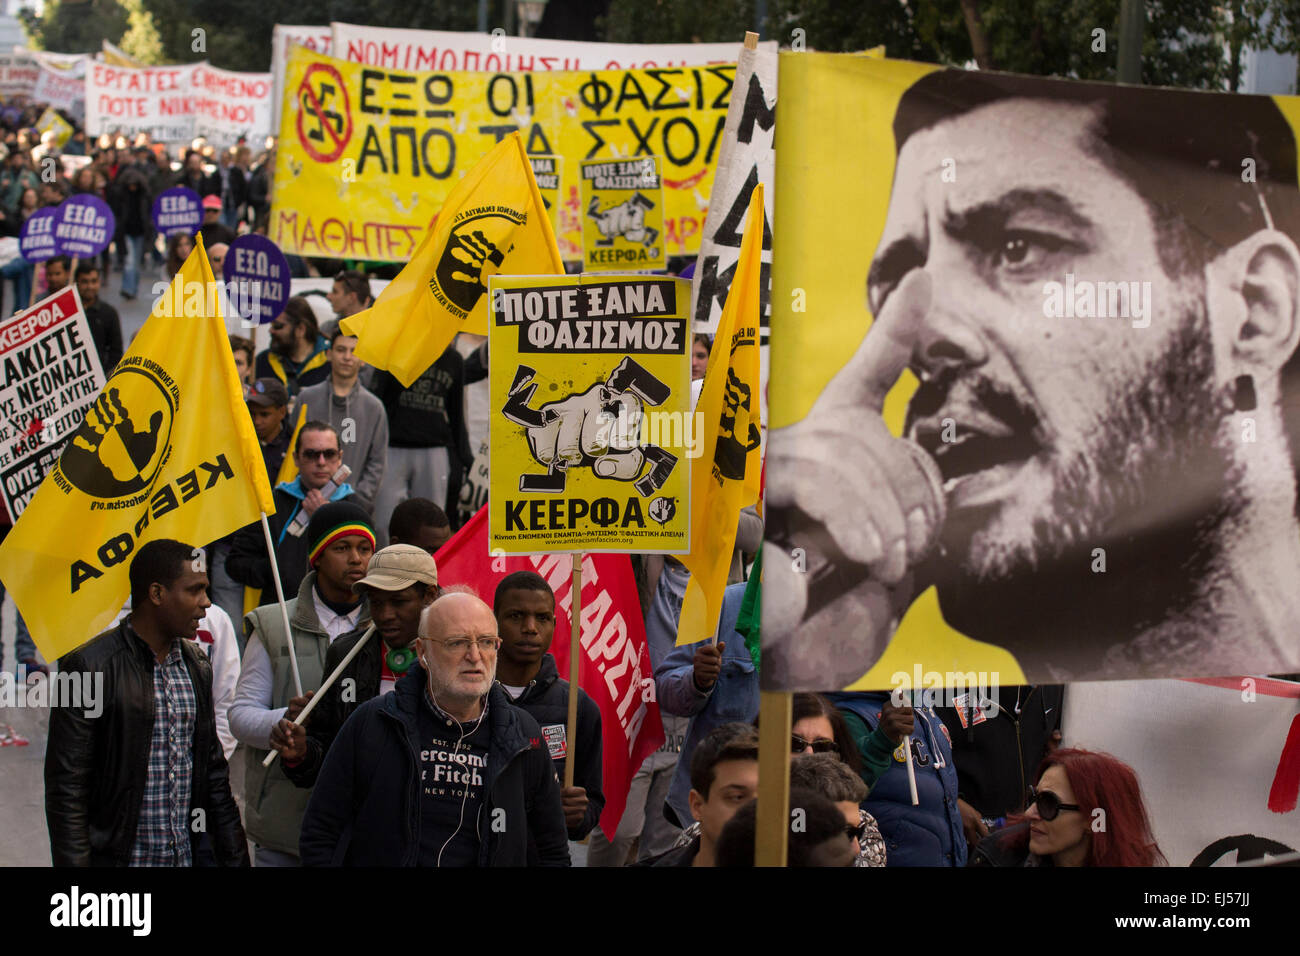 Athens, Greece, March 21, 2015. Activists march shouting slogans against racism and fascism on the International Day for the Elimination of Racial Discrimination. With racism on the rise in Greece and the neo-Nazi party Golden Dawn being the third force in parliament thousands took part in a rally organized by anti-racist organizations. Credit:  Nikolas Georgiou/Alamy Live News Stock Photo